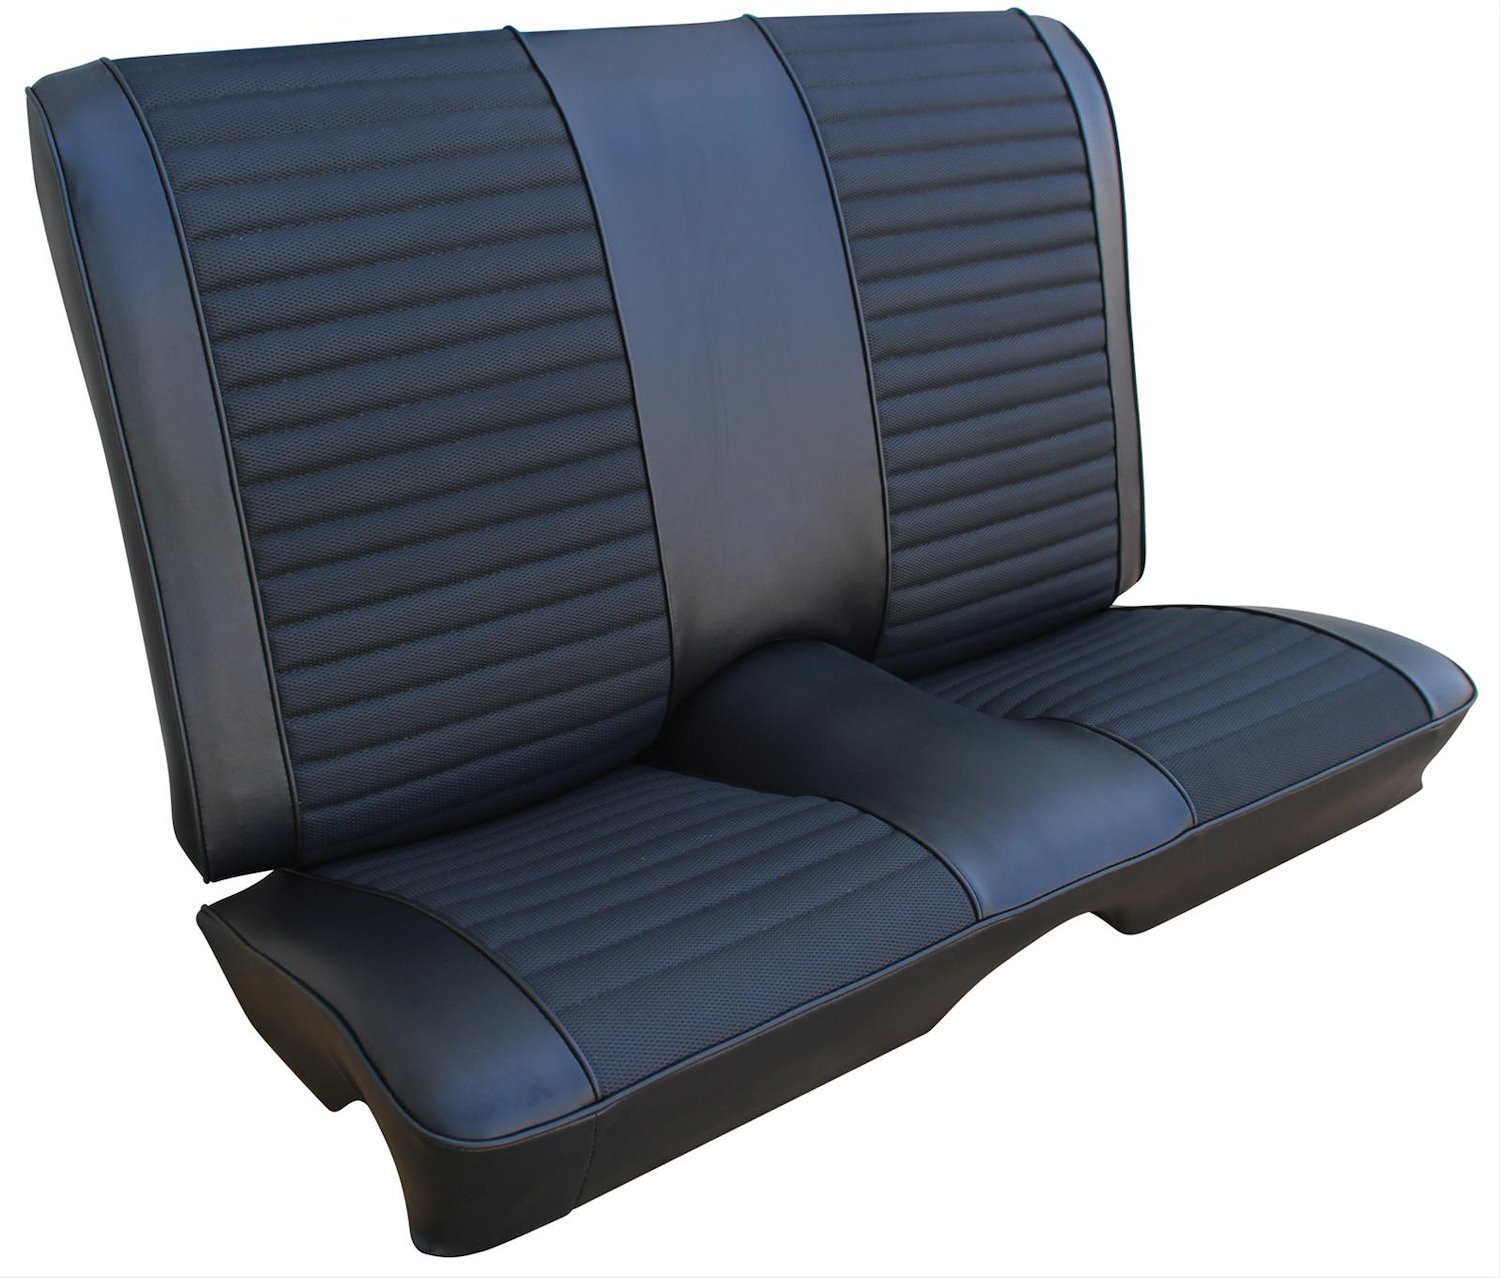 Mach-1-Style Rear Bench Seat 1969-1970 Ford Mustang Convertible